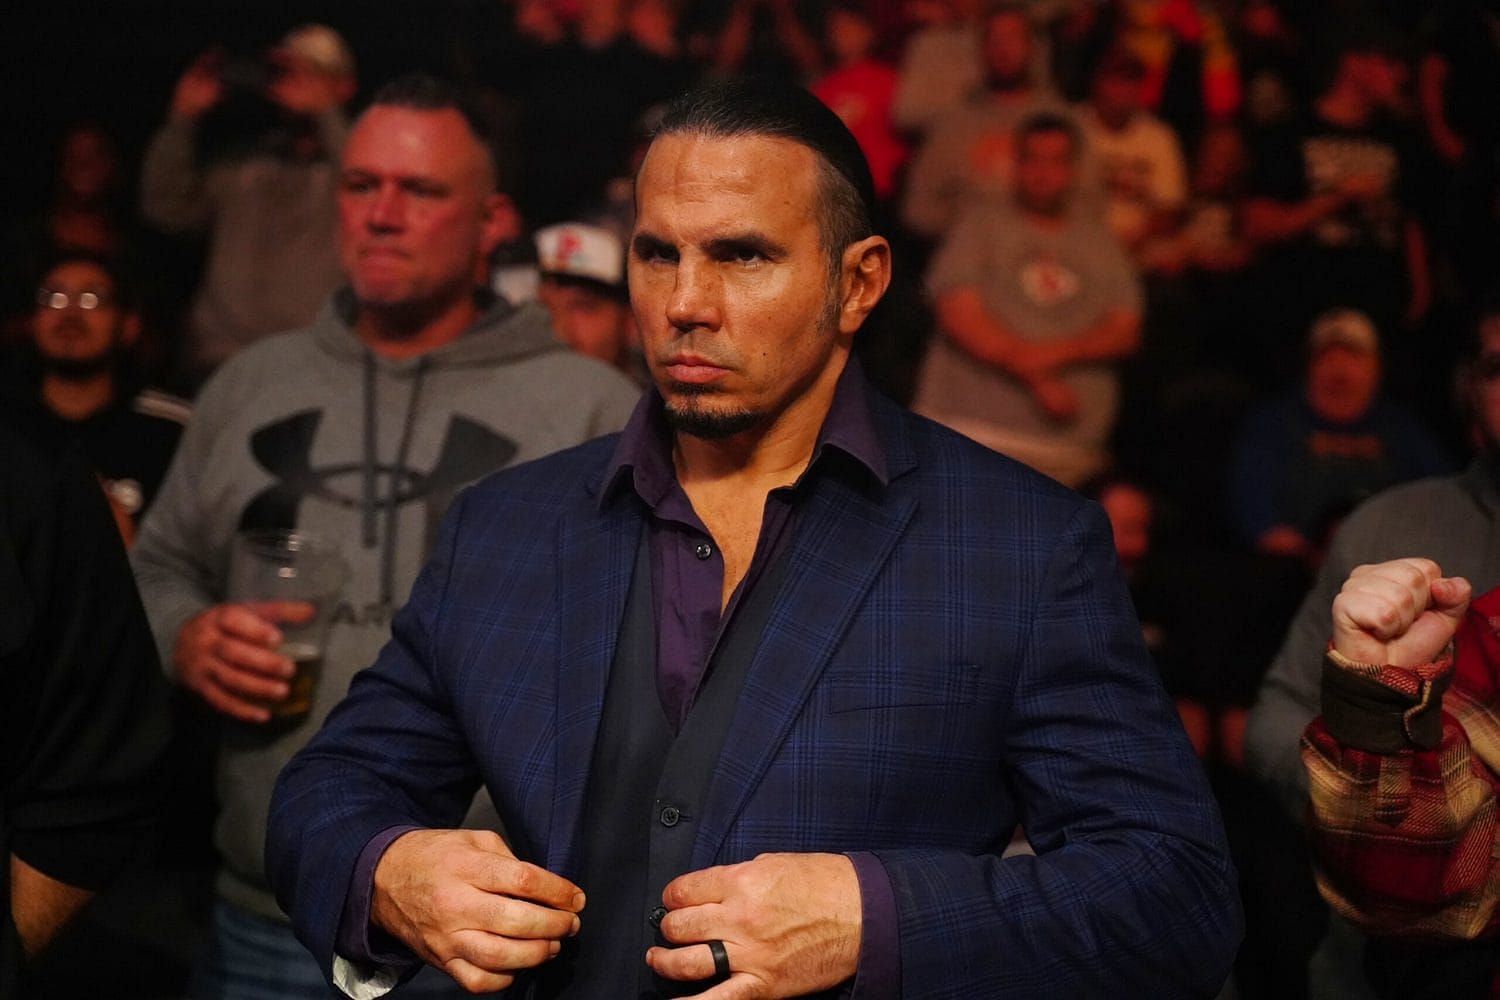 Matt Hardy has enjoyed a reunion with his brother as of late